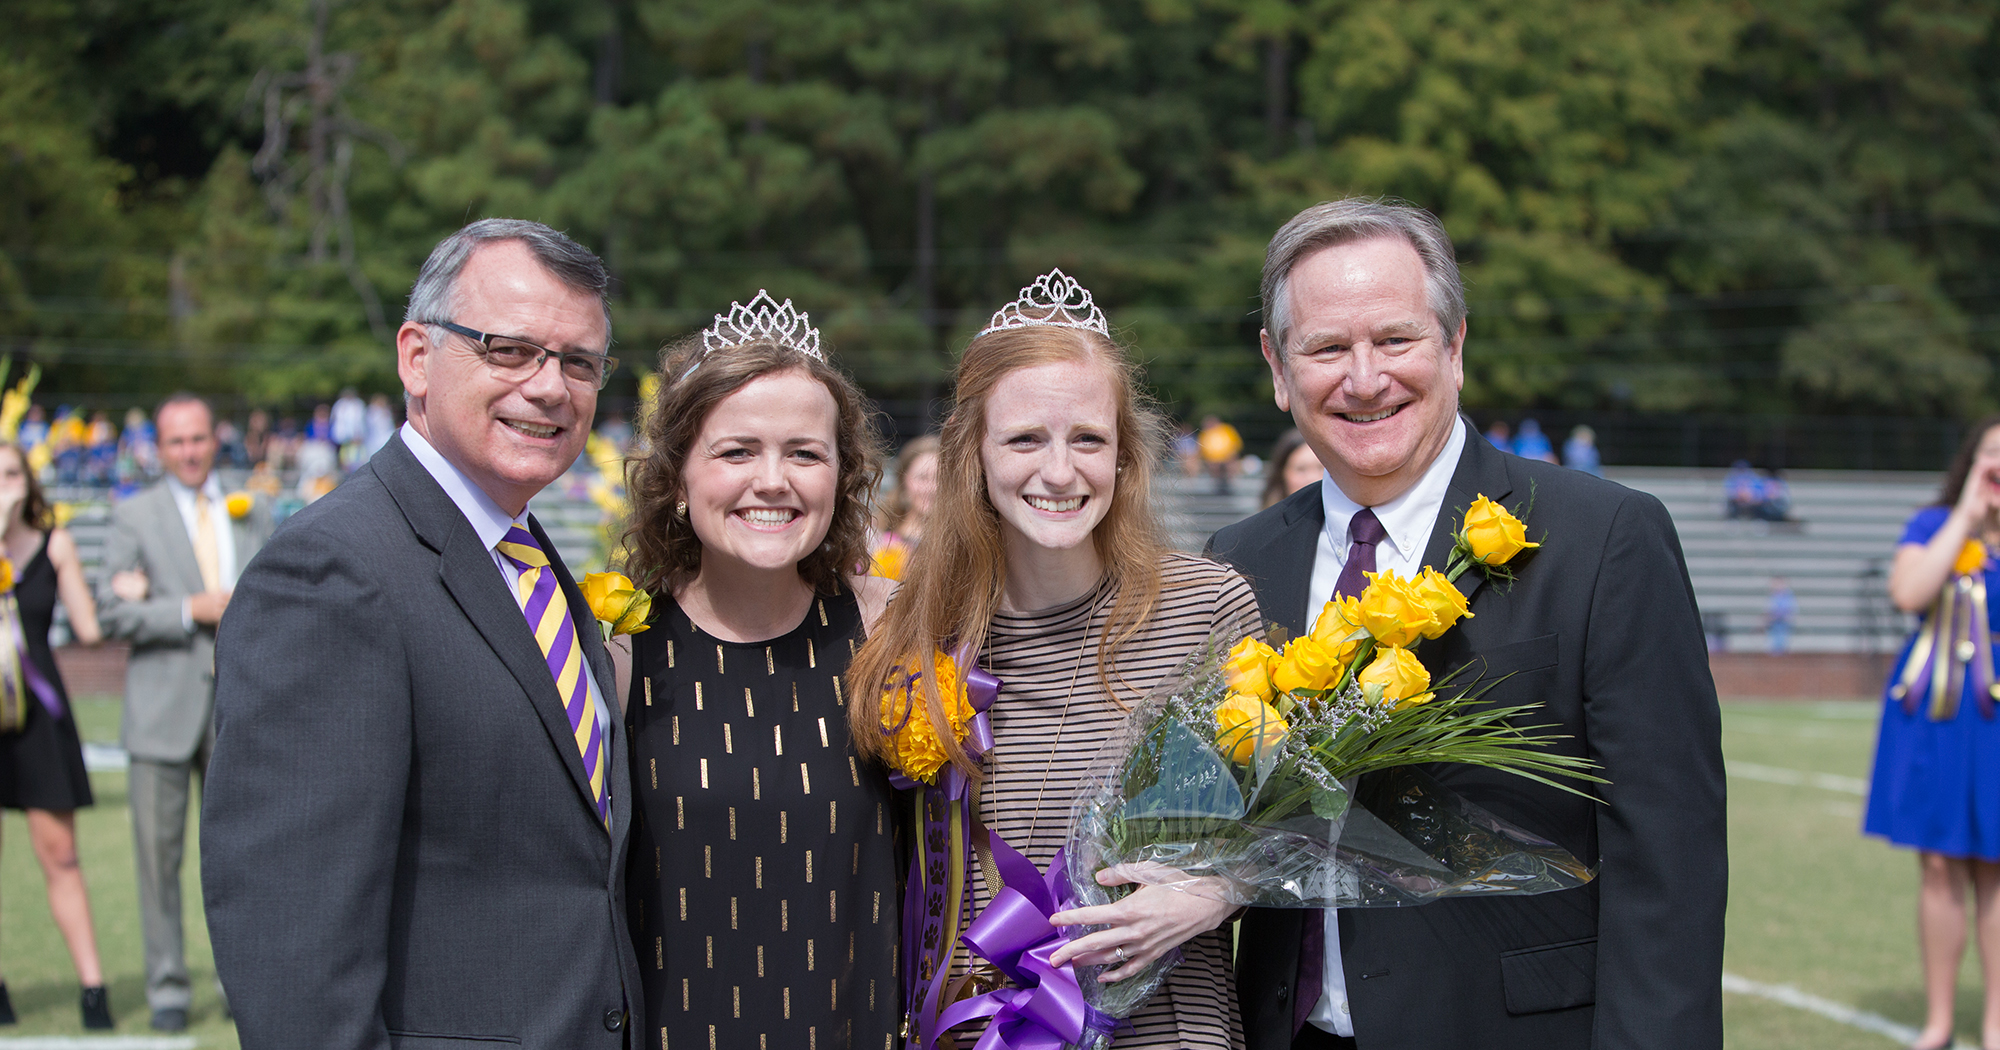 Ouachita crowns Abby Root as 2016 Homecoming Queen.